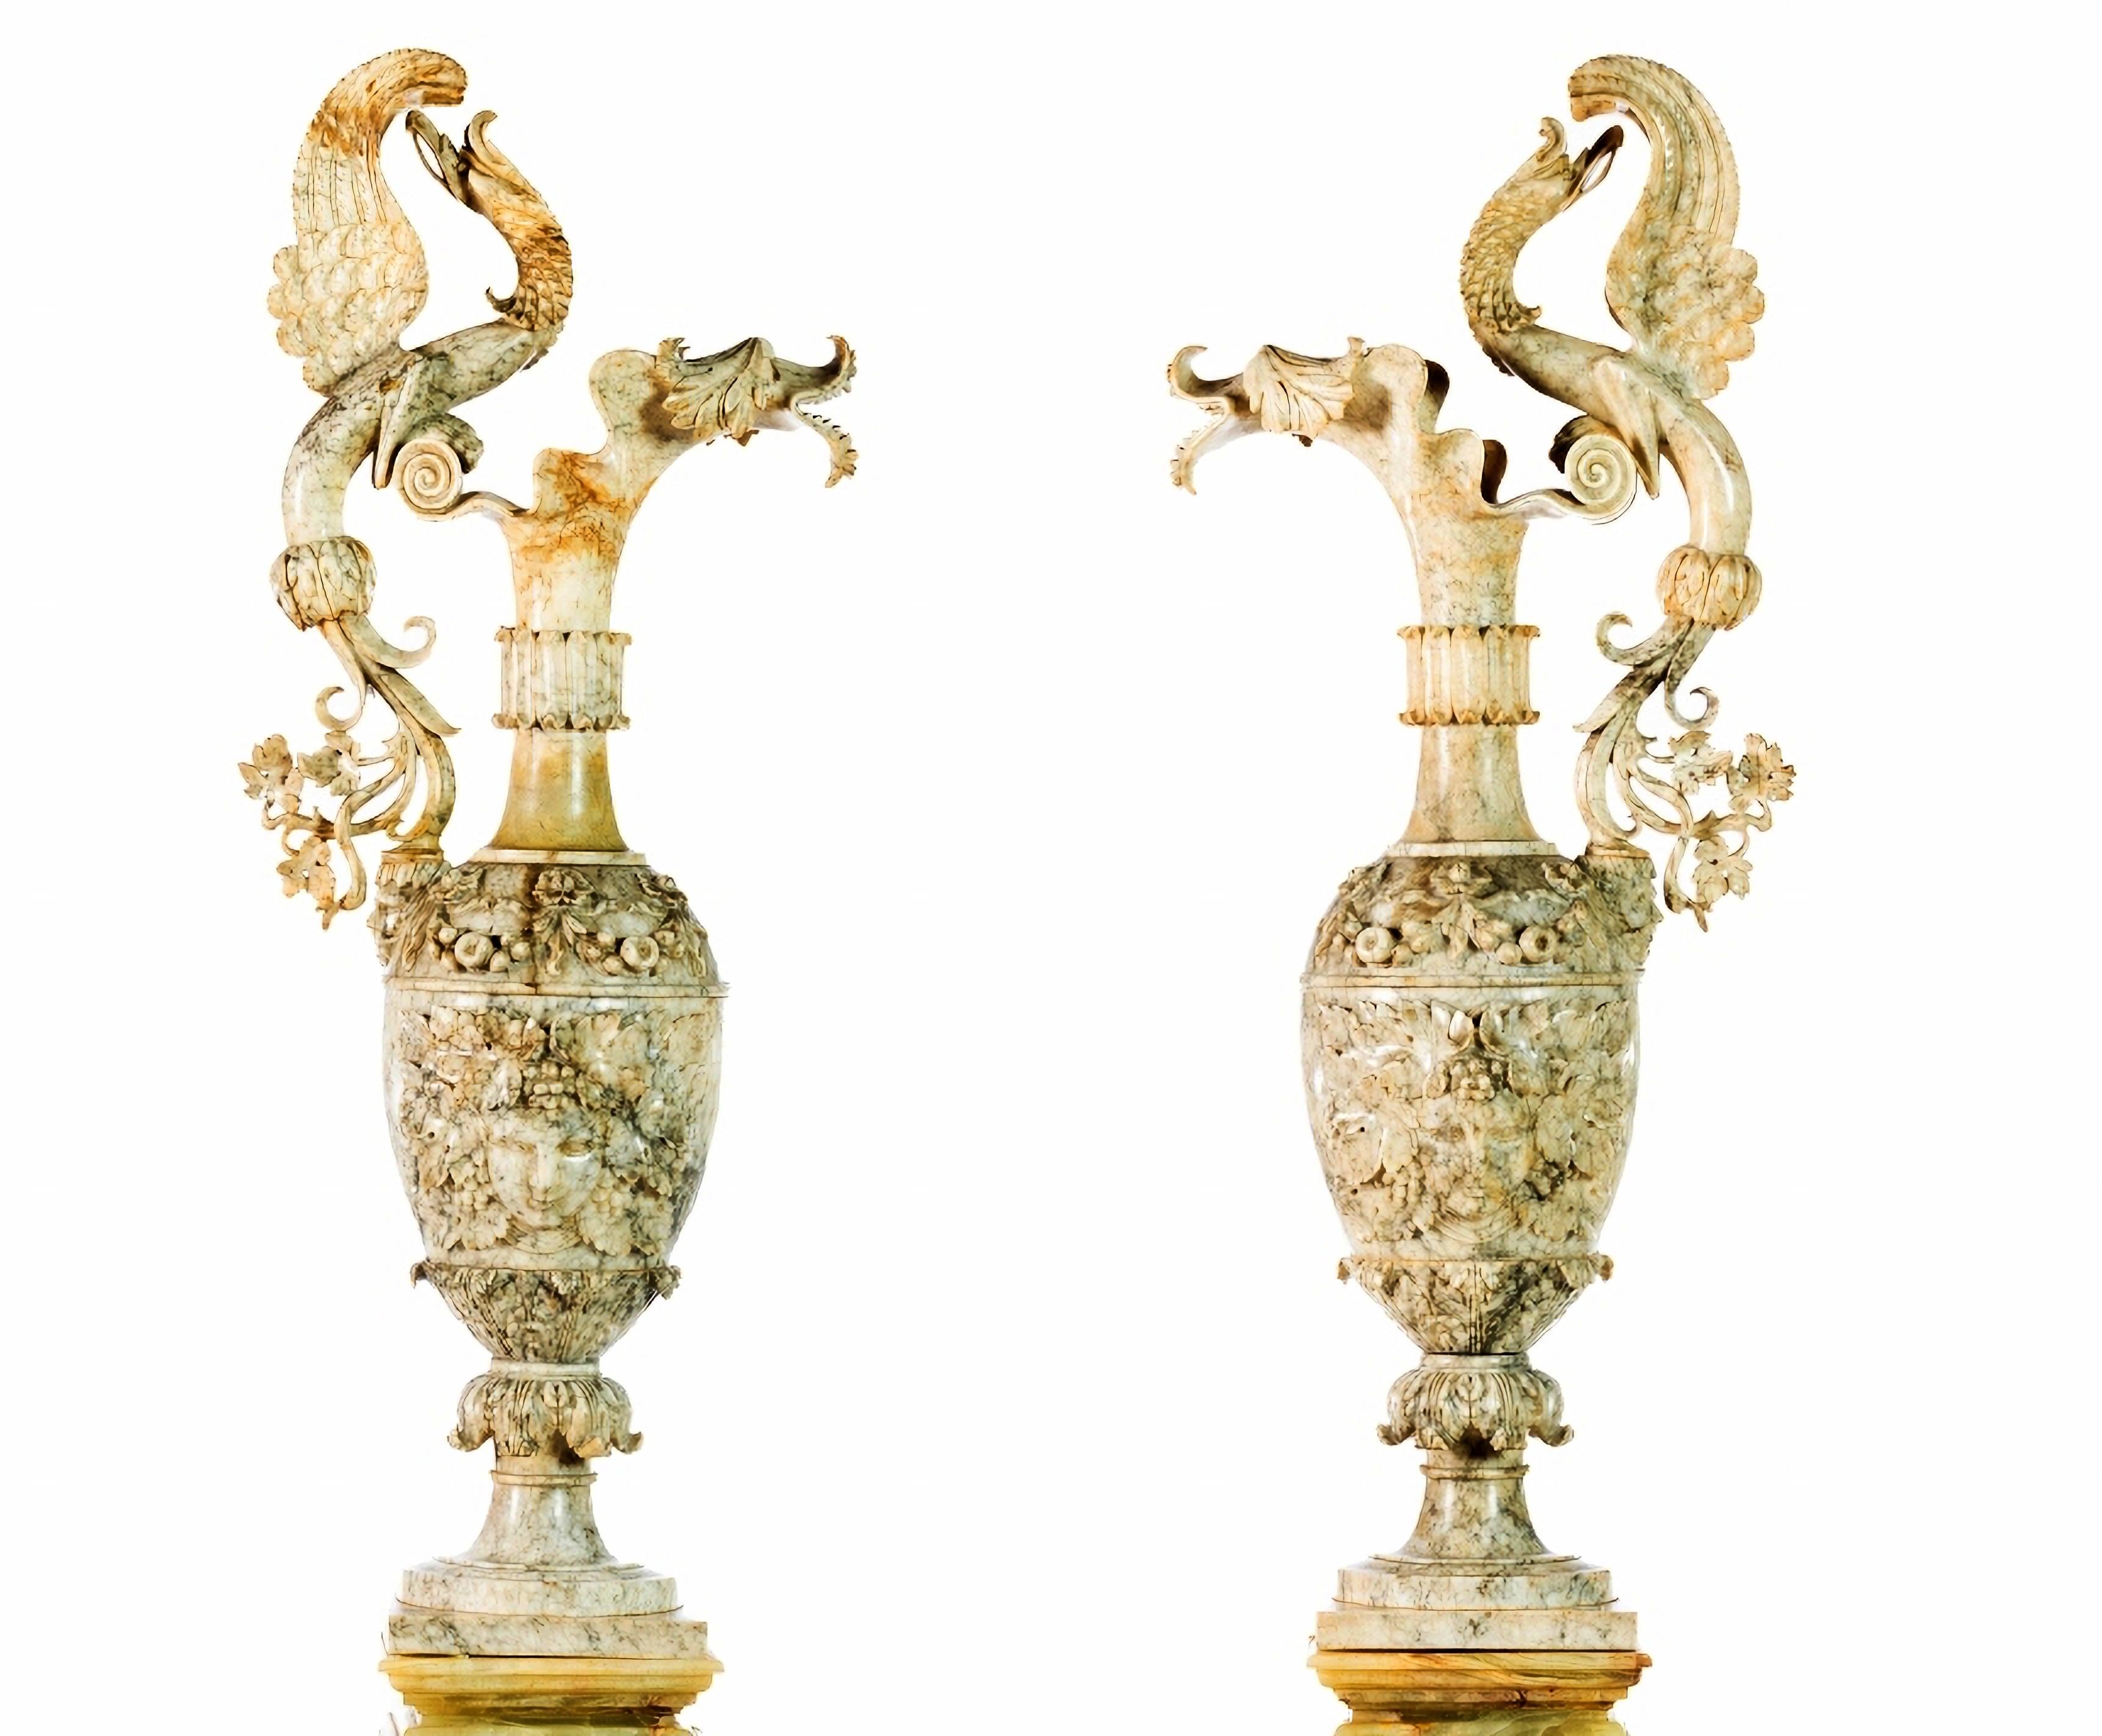 AMAZING PAIR OF ITALIAN LARGE AMPHORAS 19th Century

Italians, from the 19th century
in alabaster, with relief decoration representing plant motifs, fantastic animals and masks. 
Set on alabaster bases. 
Elecrified. 
Small defects and one with small